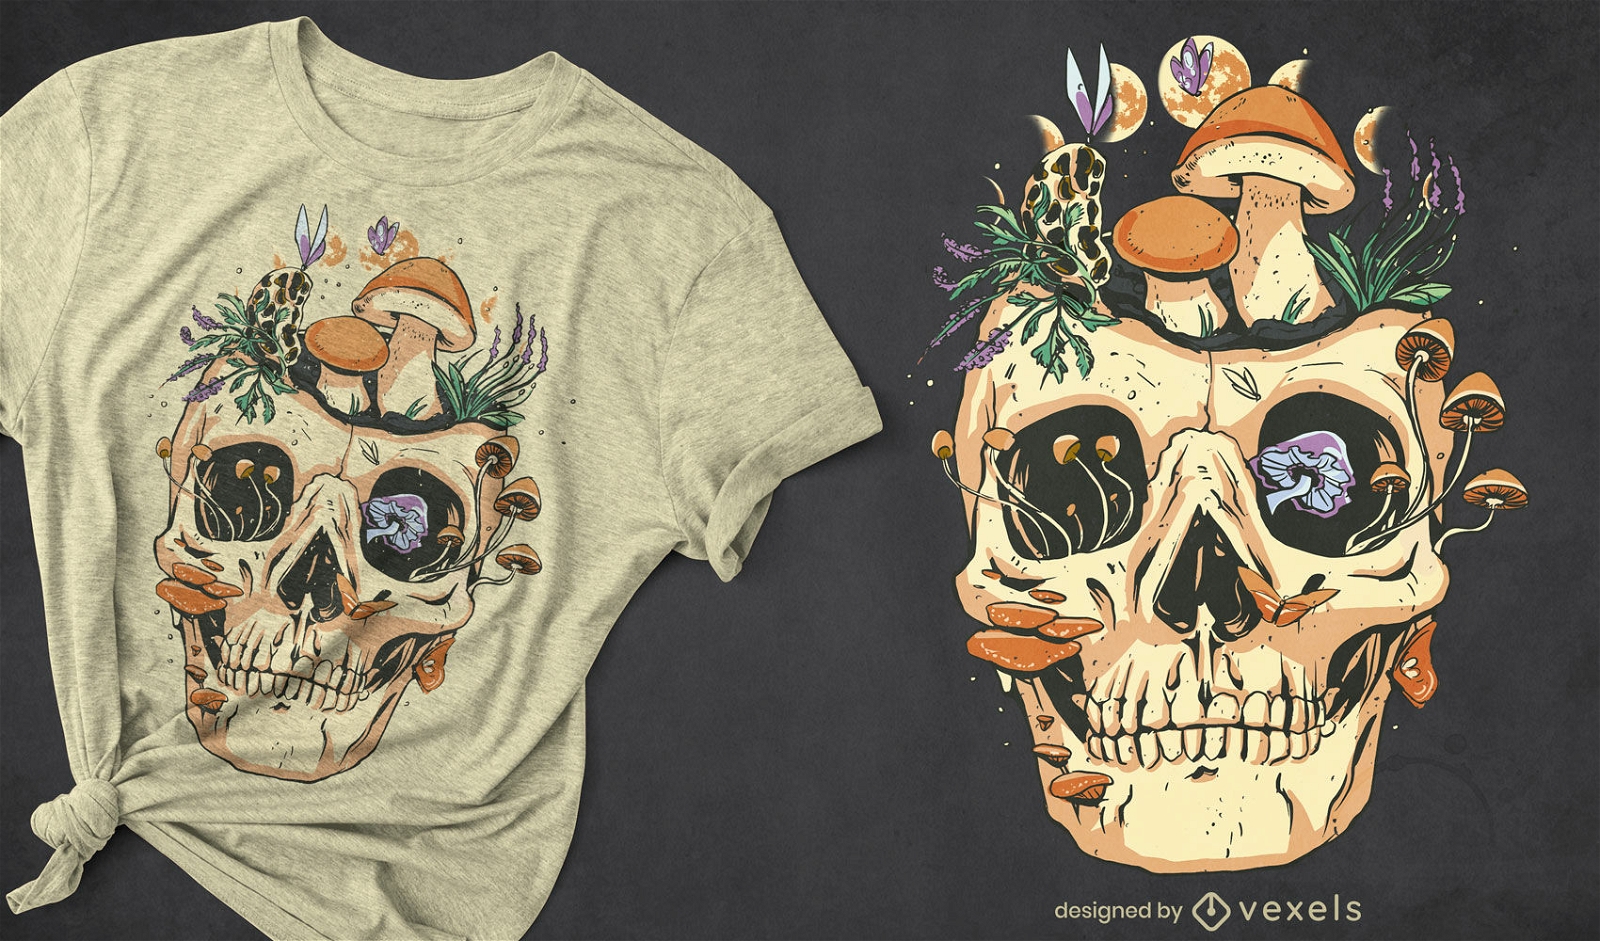 Skull with mushrooms and flowers t-shirt design